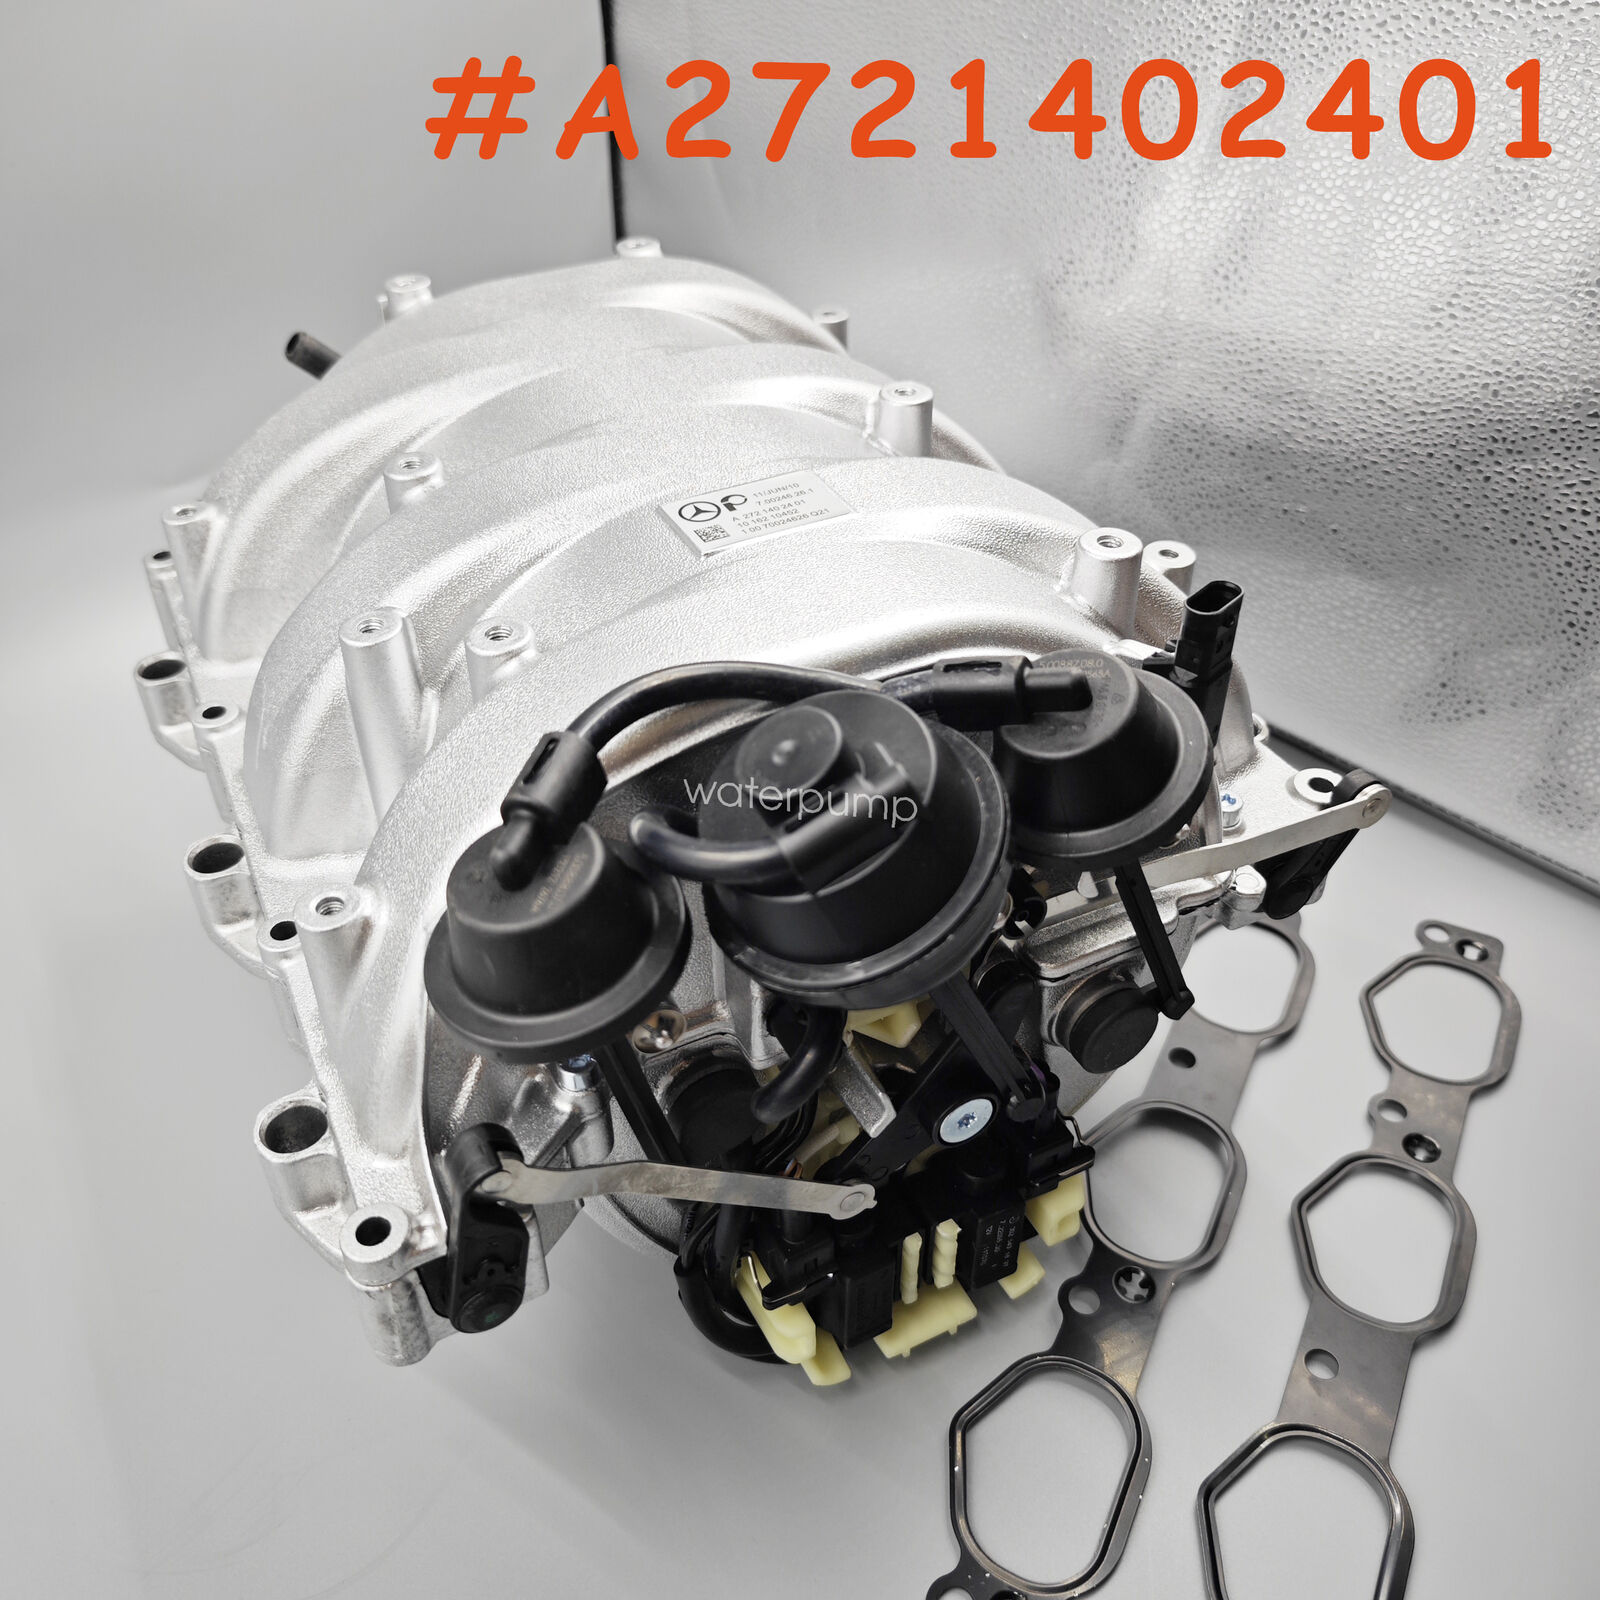 OEM Engine Intake Manifold Assembly Fit Mercedes-Benz C230 E350 C280 R350 ML350